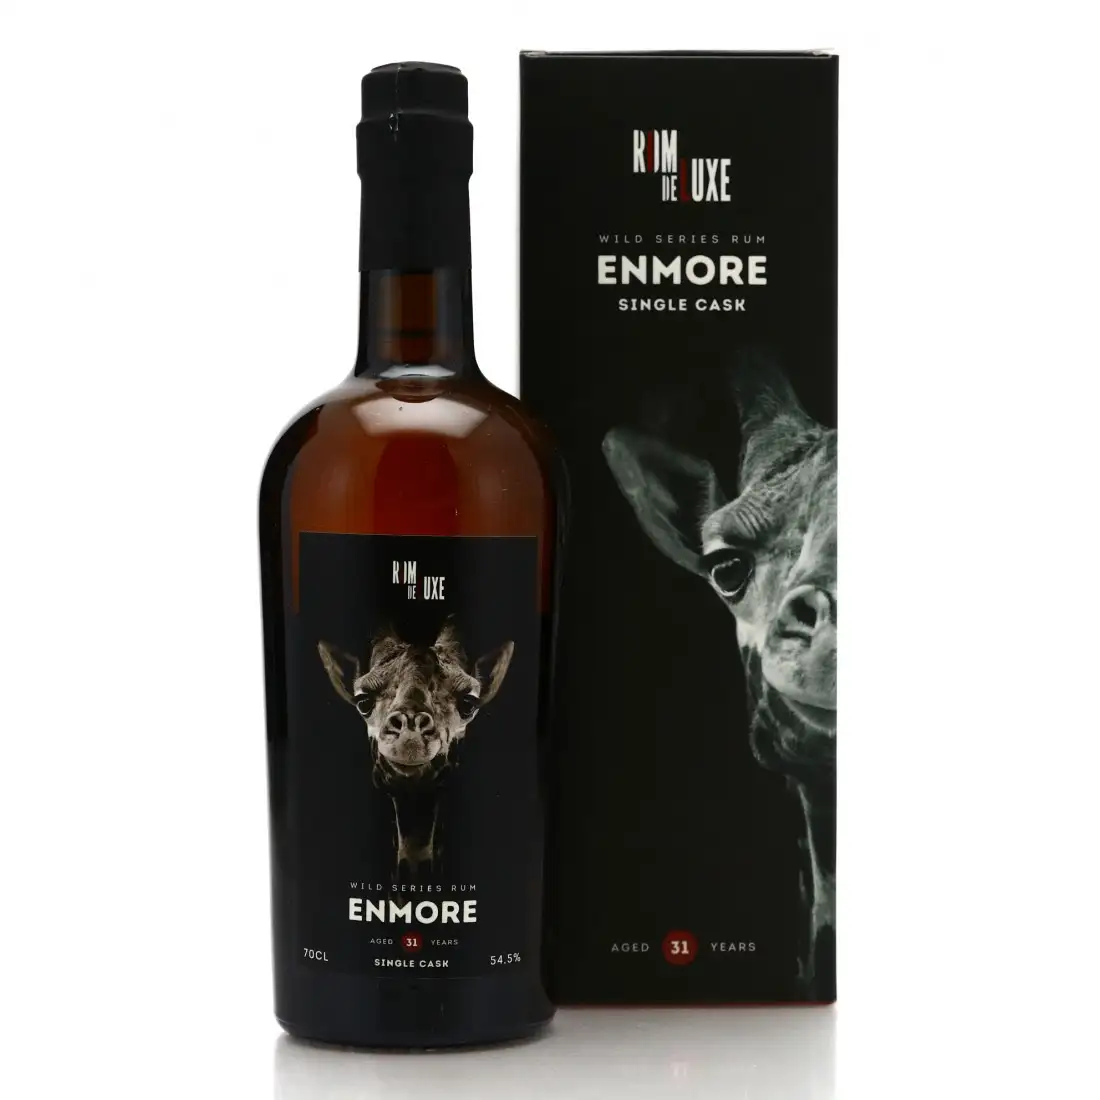 Image of the front of the bottle of the rum Wild Series Rum Enmore No. 27 (batch 1) MEV